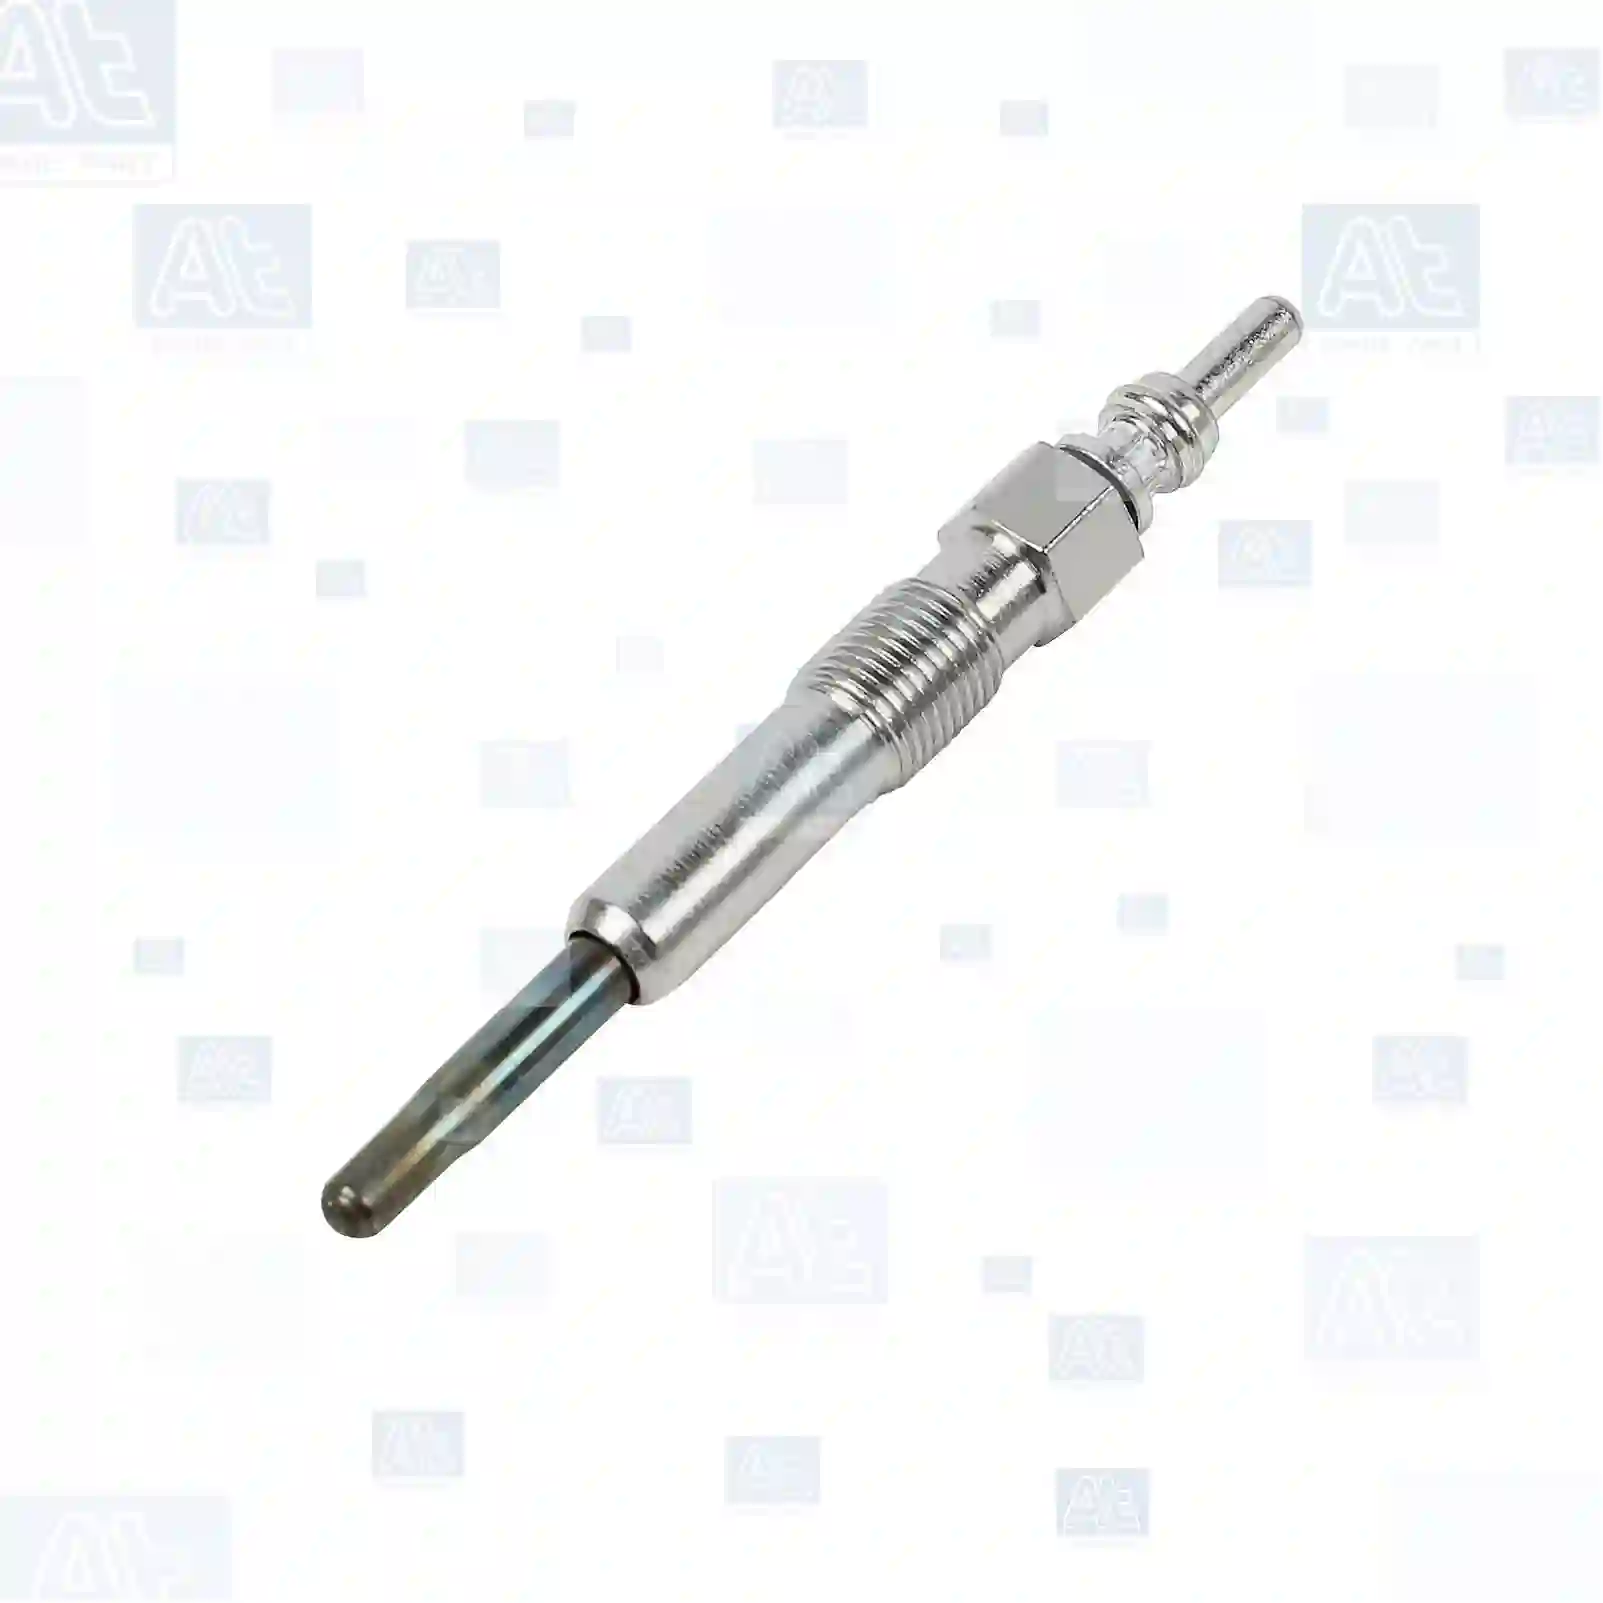 Engine Glow plug, at no: 77700067 ,  oem no:60079, 46072001, N10140101, N10140102, N10140103, N10140104, N10140105, N10302101, N10302102, 5066840AA, KJ0741144, 59624J, 596258, 7700111323, 7700855865, 7700856238, 8200090817, 8200434855, 8200490950, 8671004853, 90210824, 00773592, 05961881, 05973752, 05973753, 46072001, 50032390, 762266740, 77359200, 95534788, 9616472480, 96165724, 1029446, 1029461, 1037204, 1090519, 1669977, 6776964, 6852967, 95VW-6M090-AA, 95VW-6M090-AB, EZD33, B44SR, 1214020, 1214082, 32017061, 32017084, 4402724, 4409469, 4416912, 4419054, 88900722, 88900730, 9110724, 91158701, 93183740, 93189648, 93196829, 93196922, 95508490, 1106500QAG, 5951881, 5973752, 5066840AA, 01180400, N10140104, 21001110, M883828, MW30756065, 11065-00Q00, 11065-BN701, 77001-11323, 82004-90950, 1214020, 1214033, 1214044, 1214074, 1214305, 4409469, 4416912, 4419054, 59624J, 596258, 493061, 1106500QAG, 7700111323, 7701033403, 7701414108, 7701414123, 8000464077, 8200090817, 8200343855, 8200421091, 8200434855, 8671004853, N10140101, N10140102, N10140103, N10140104, N10140105, N10302101, N10302102, N10140101, N10140102, N10140103, N10140104, N10140105, N10302101, N10302102, 09900-TD001, 09900-TD001-000, 18550-66G00-000, 18550-67JG0, 18550-67JG0-000, 18550-84A00, 18550-84A00-000, 18550-84A00-LCP, 18550-84A50, 18550-84A50-000, 18550-84A51, 18550-84A51-000, 596140, 596274, 9150771880, 004729585, 46072001F, 46072007F, 1275498, 1275580, 30883828, 1037204, N10140101, N10140102, N10140103, N10140104, N10140105, N10302101, N10302102 At Spare Part | Engine, Accelerator Pedal, Camshaft, Connecting Rod, Crankcase, Crankshaft, Cylinder Head, Engine Suspension Mountings, Exhaust Manifold, Exhaust Gas Recirculation, Filter Kits, Flywheel Housing, General Overhaul Kits, Engine, Intake Manifold, Oil Cleaner, Oil Cooler, Oil Filter, Oil Pump, Oil Sump, Piston & Liner, Sensor & Switch, Timing Case, Turbocharger, Cooling System, Belt Tensioner, Coolant Filter, Coolant Pipe, Corrosion Prevention Agent, Drive, Expansion Tank, Fan, Intercooler, Monitors & Gauges, Radiator, Thermostat, V-Belt / Timing belt, Water Pump, Fuel System, Electronical Injector Unit, Feed Pump, Fuel Filter, cpl., Fuel Gauge Sender,  Fuel Line, Fuel Pump, Fuel Tank, Injection Line Kit, Injection Pump, Exhaust System, Clutch & Pedal, Gearbox, Propeller Shaft, Axles, Brake System, Hubs & Wheels, Suspension, Leaf Spring, Universal Parts / Accessories, Steering, Electrical System, Cabin